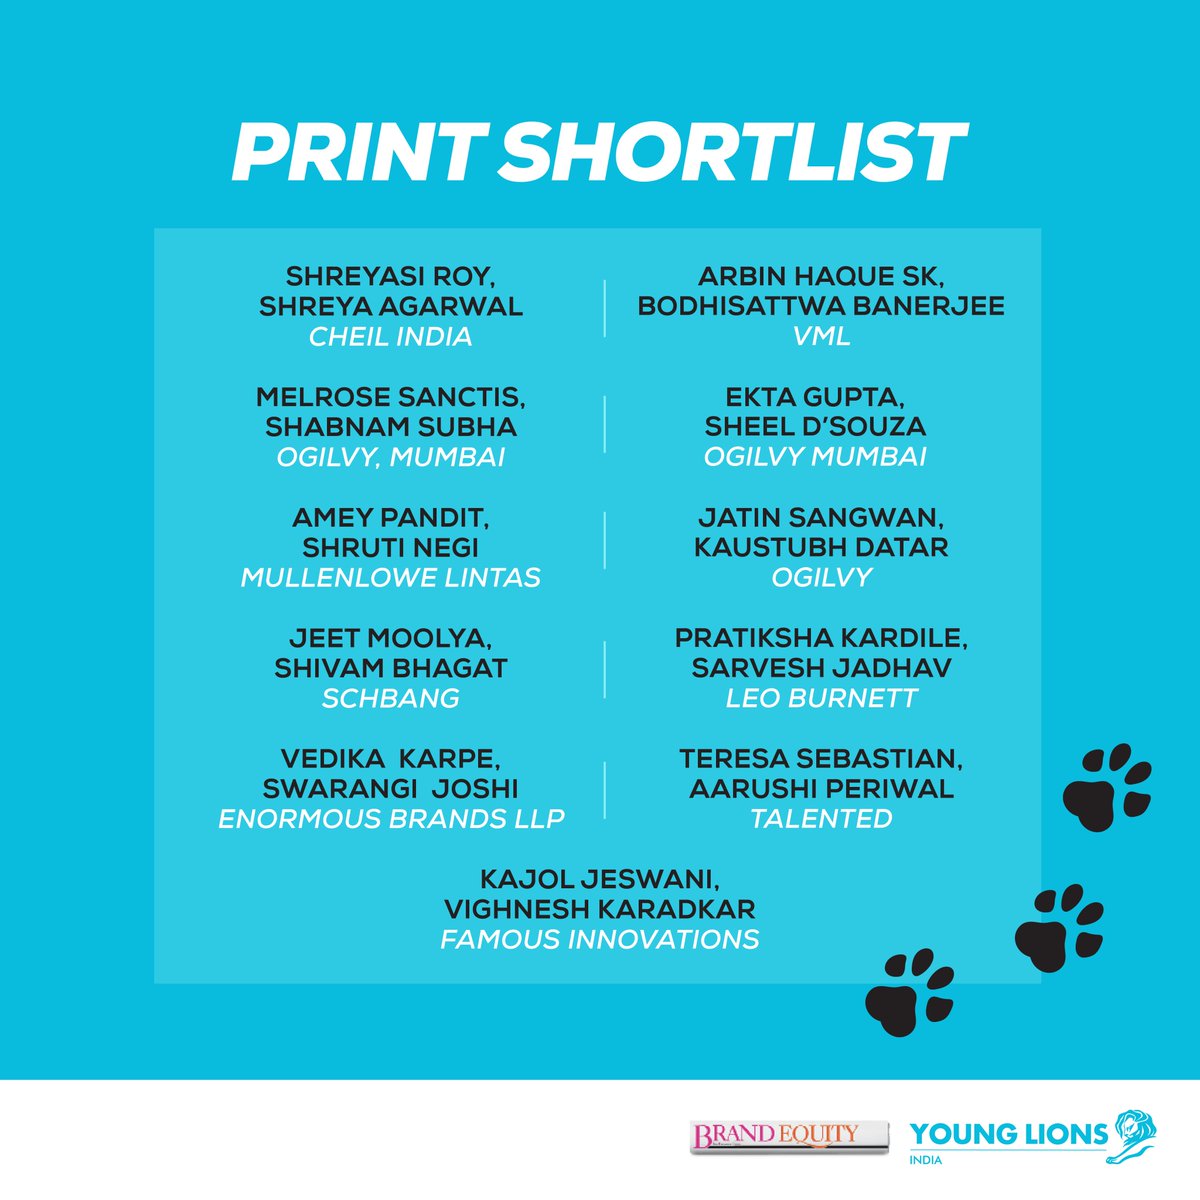 Presenting the shortlists for Young Lions. Congratulations to all the participants and all the best.

#PowerofPrint #TimesofIndia #TOI #ImpactfulAds #YoungLions #Shortlists #YoungLions2024 #Cannes #Congratulations #AllTheBest